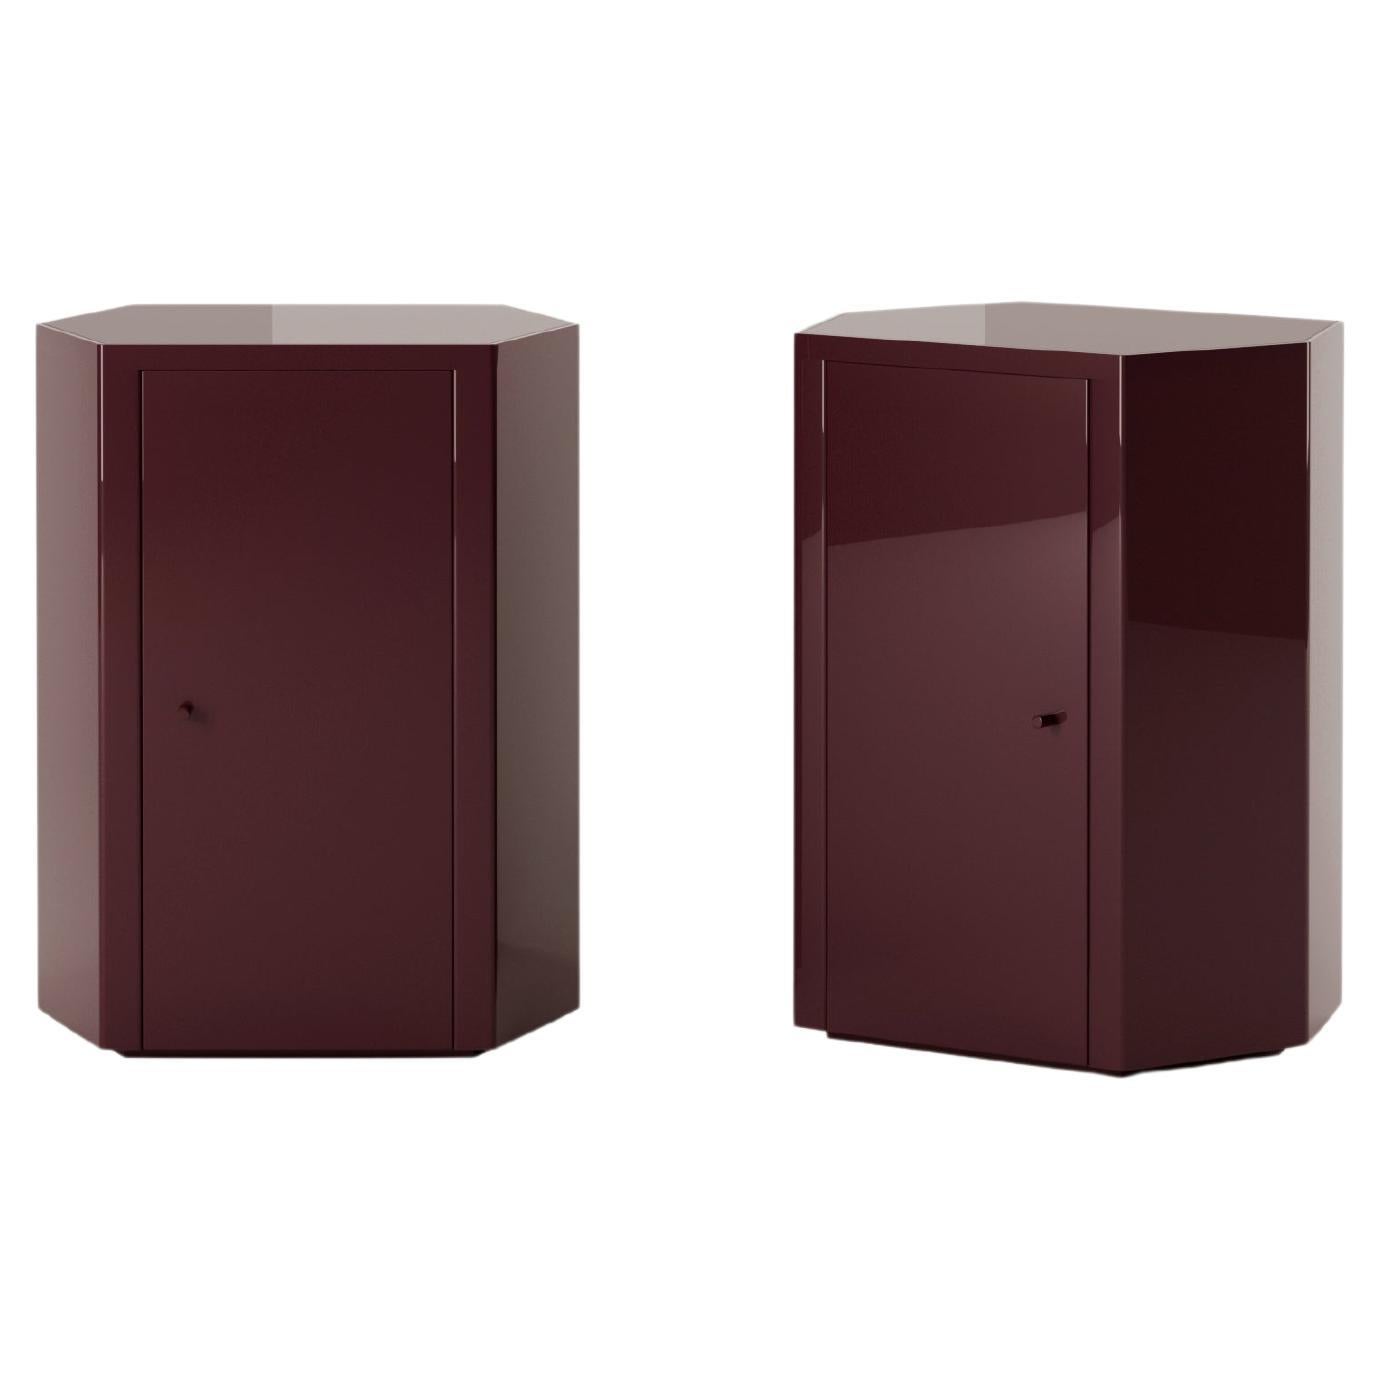 Pair of Park Night Stands in Noir Oxblood Lacquer by Yaniv Chen for Lemon